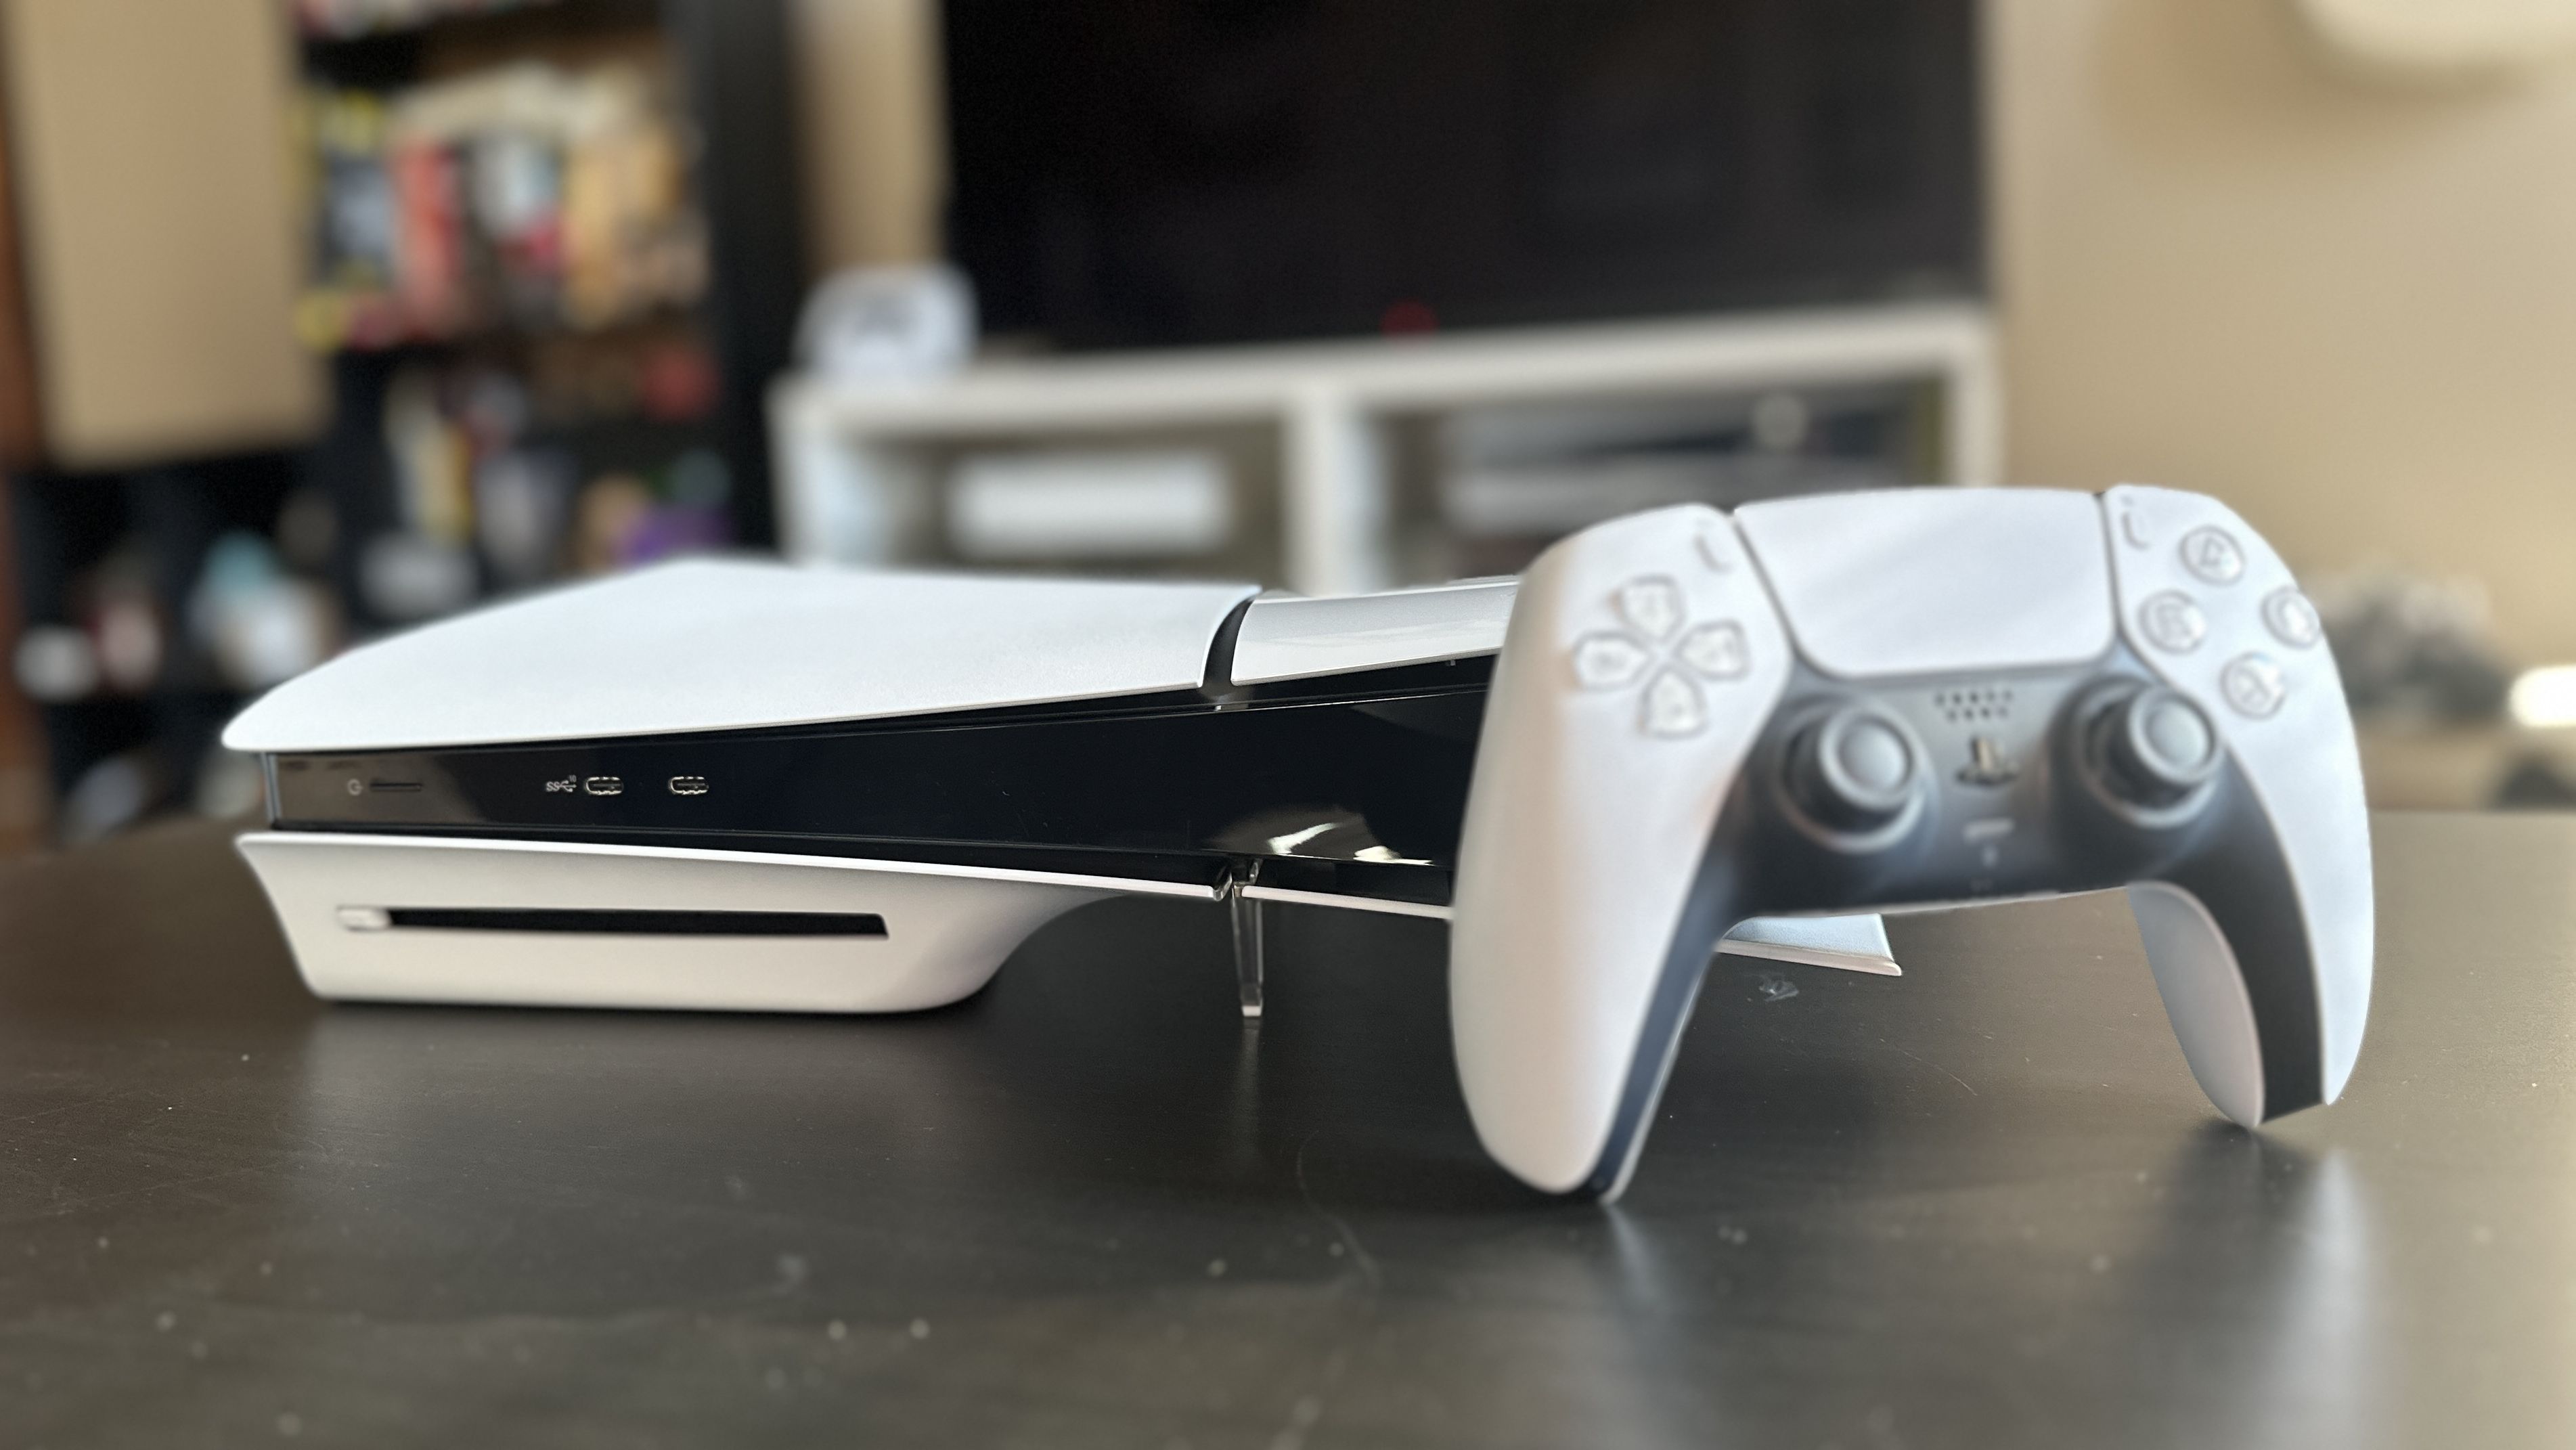 New PS5 Slim pictures show just how small the updated console is - Dexerto